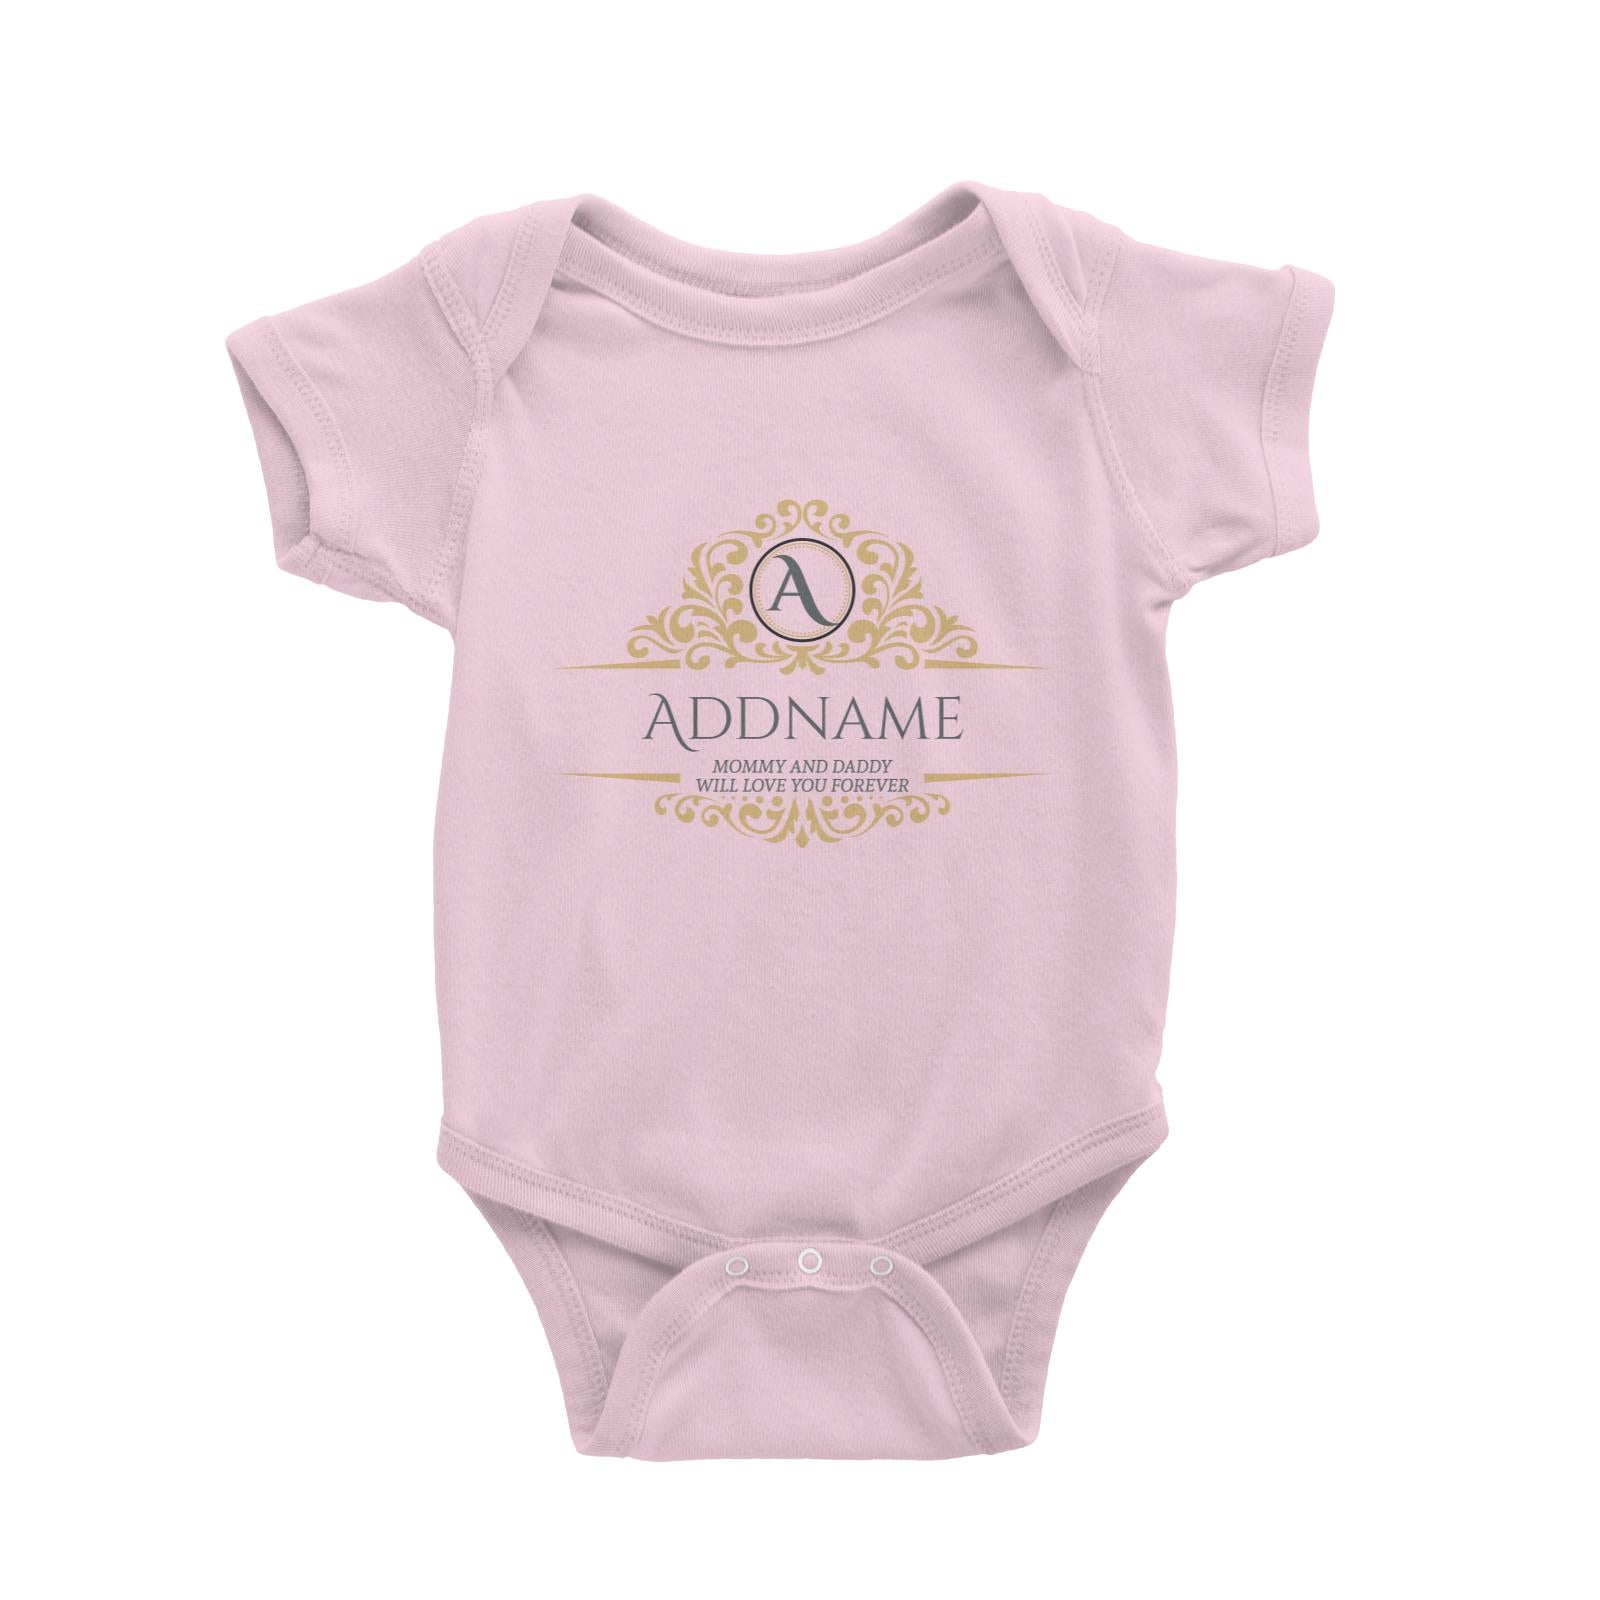 Royal Emblem Personalizable with Initial Name and Text Baby Romper